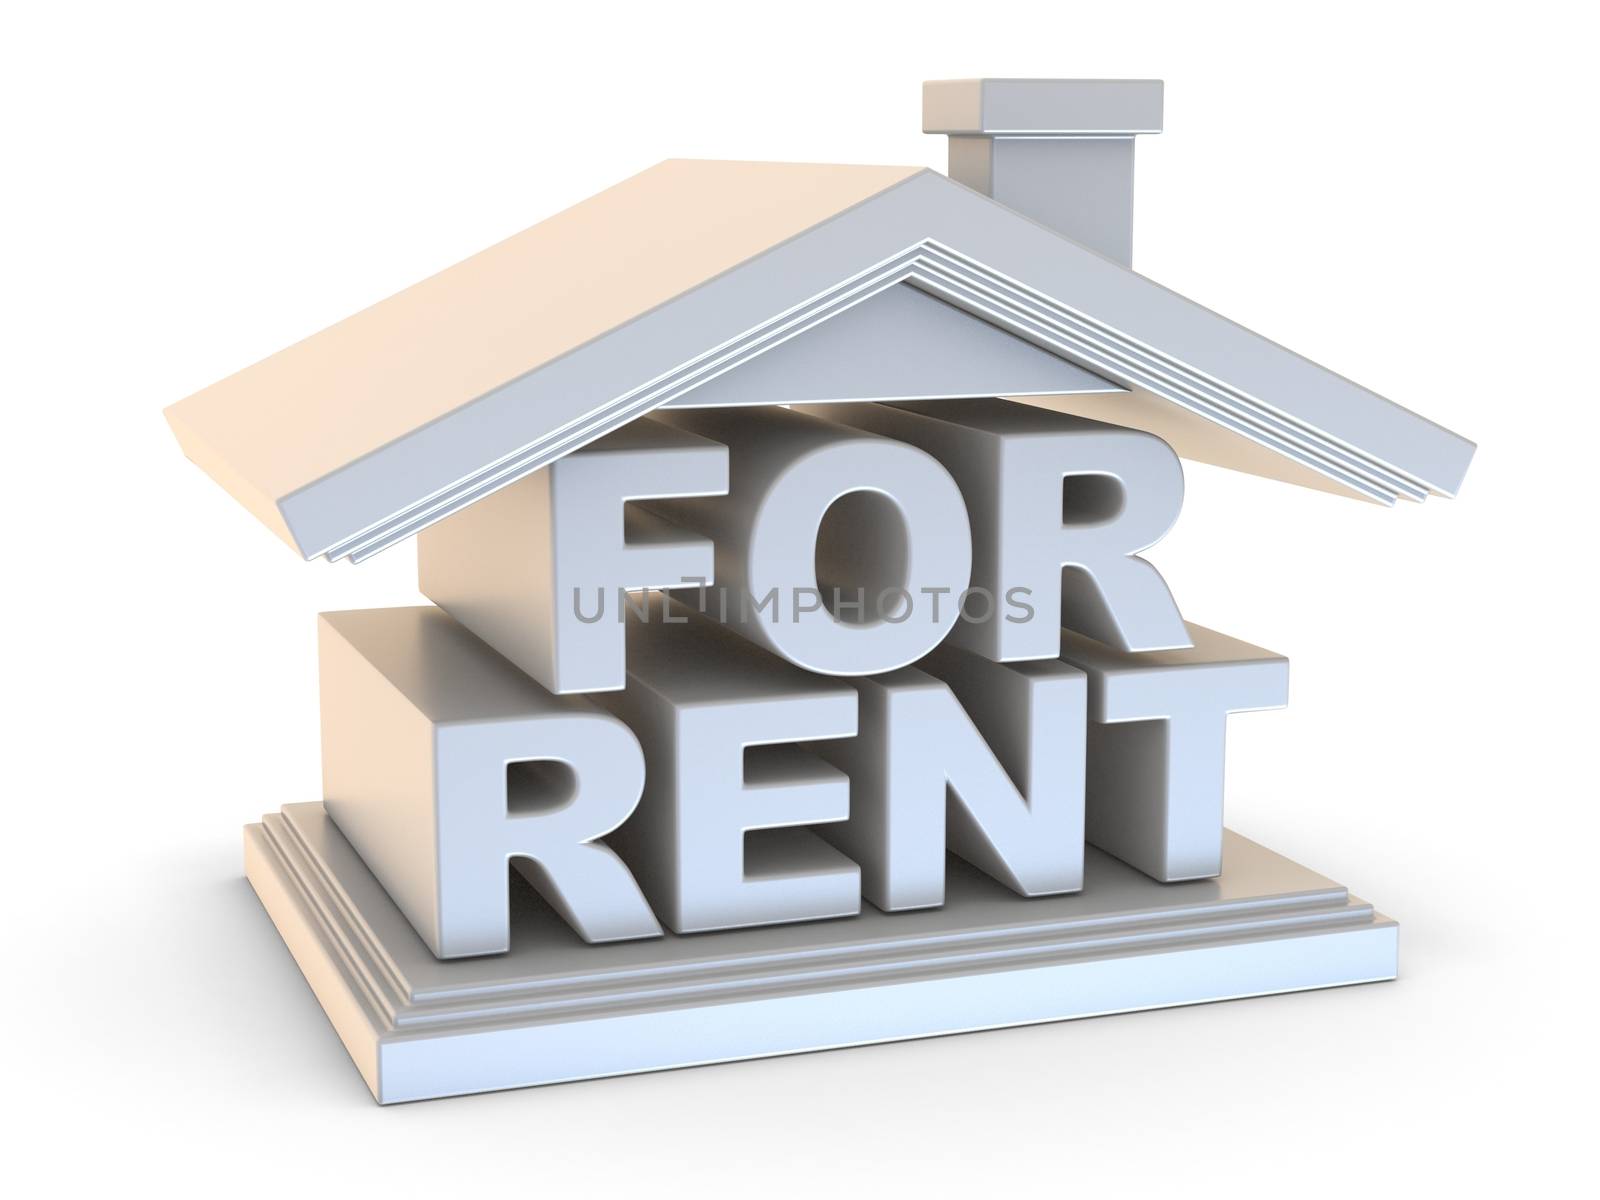 FOR RENT house sign side view 3D by djmilic